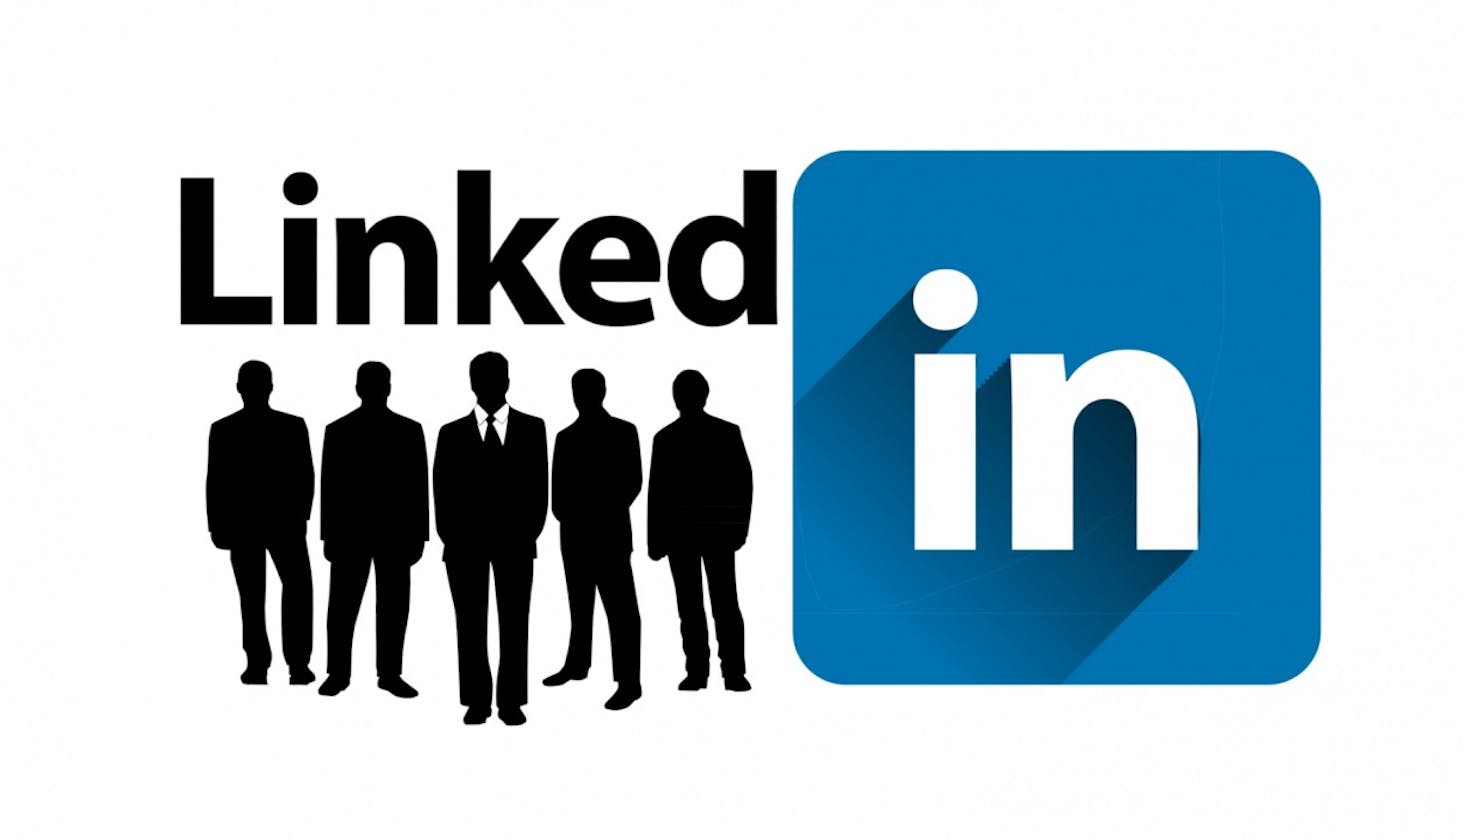 What Are 1st, 2nd, and 3rd Connections On LinkedIn?